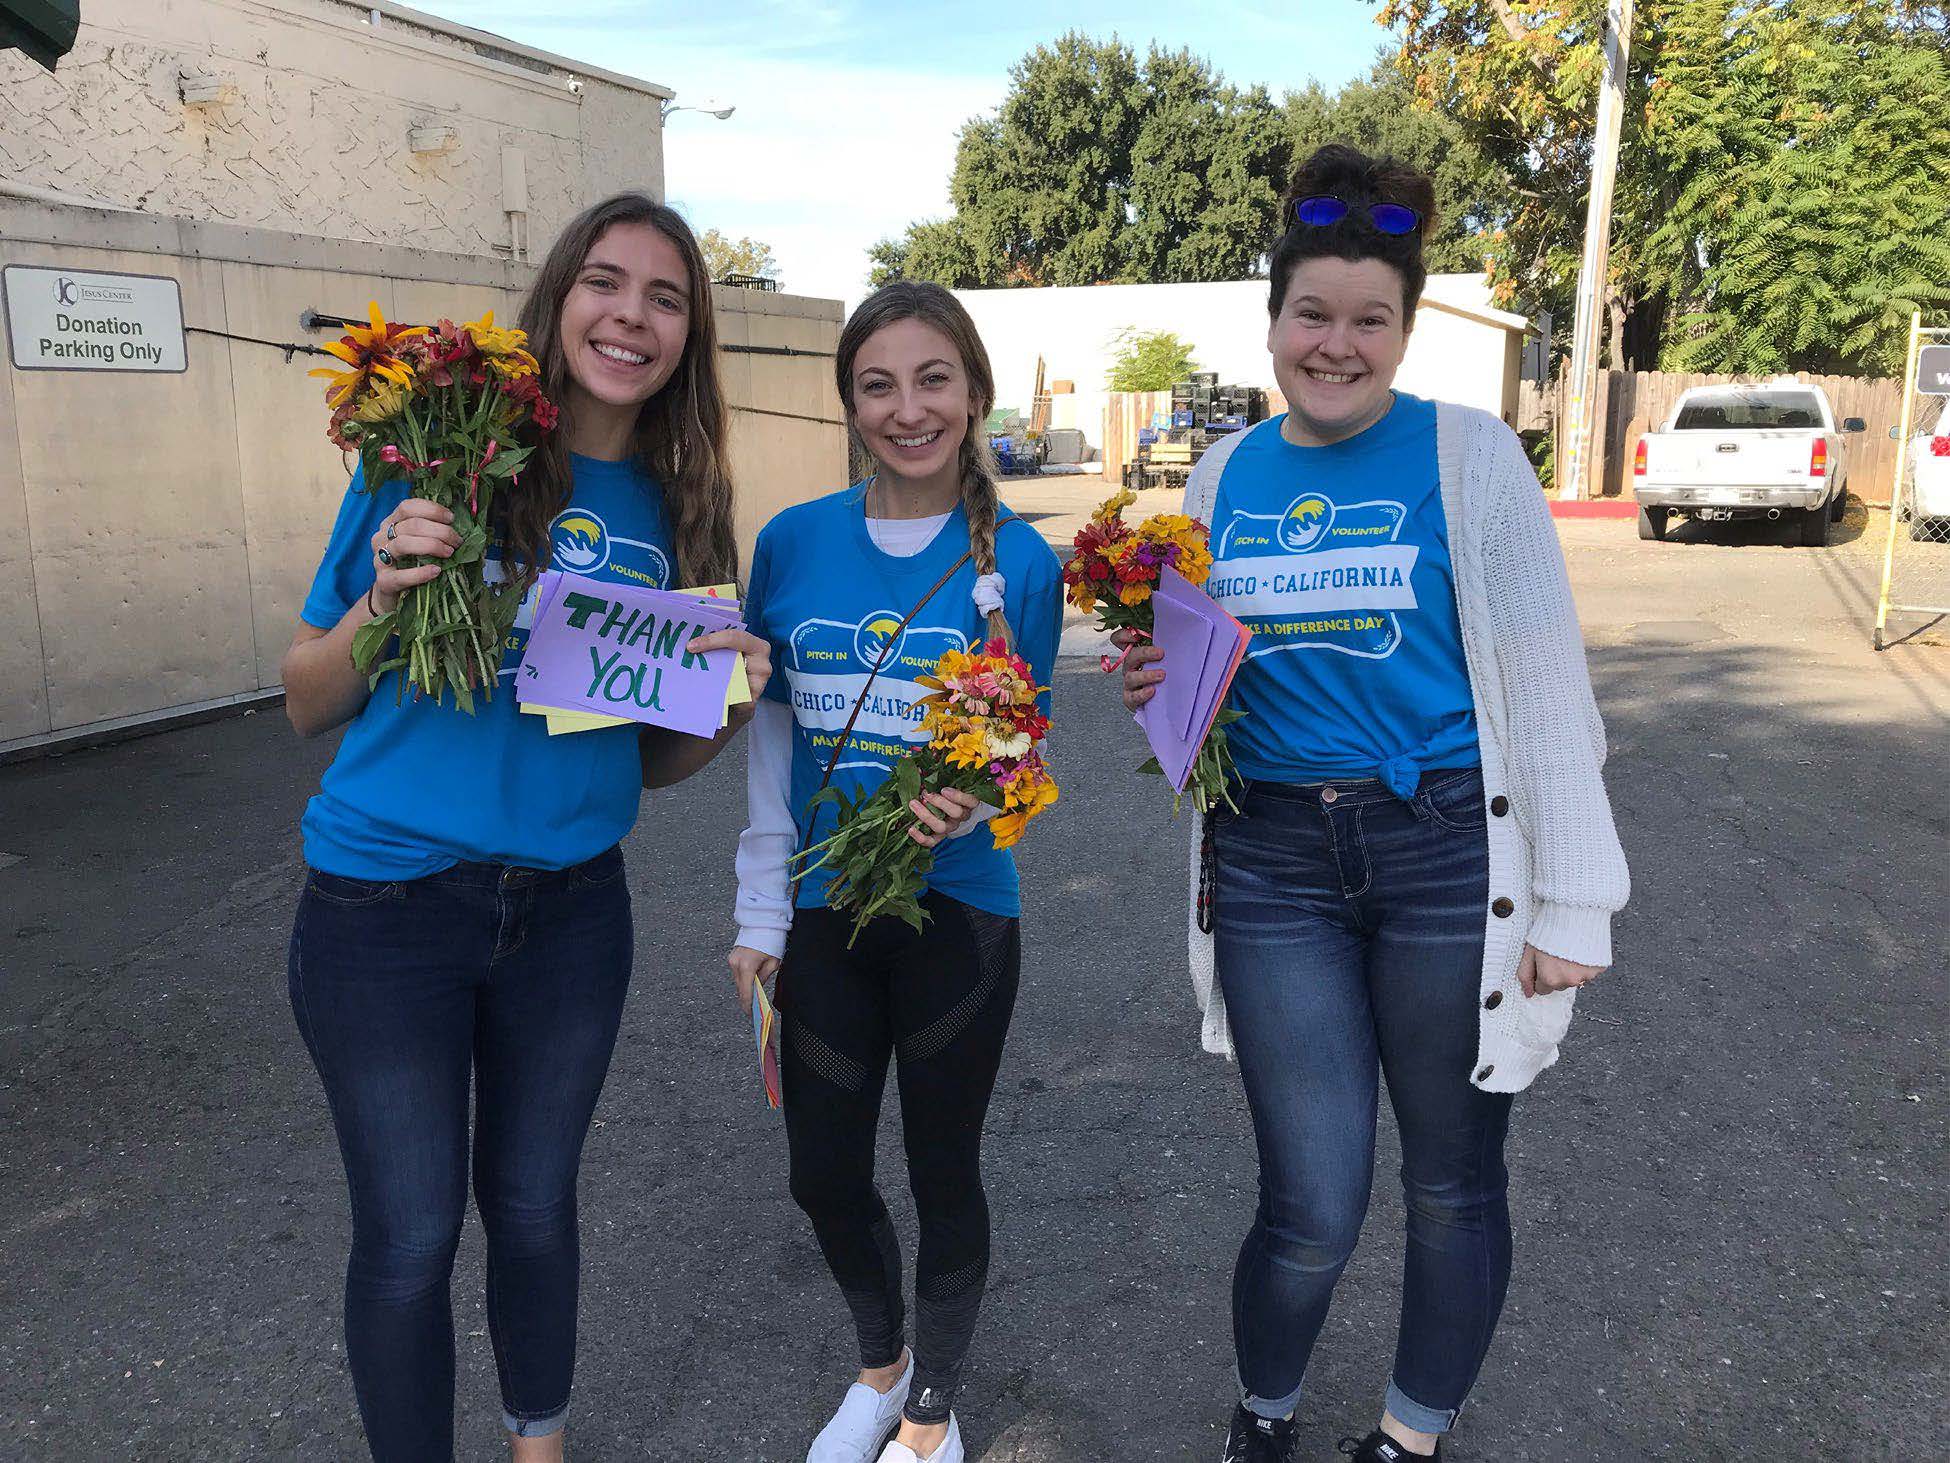 Students in the fall 2018 course volunteering at the Jesus Center on Make a Difference Day